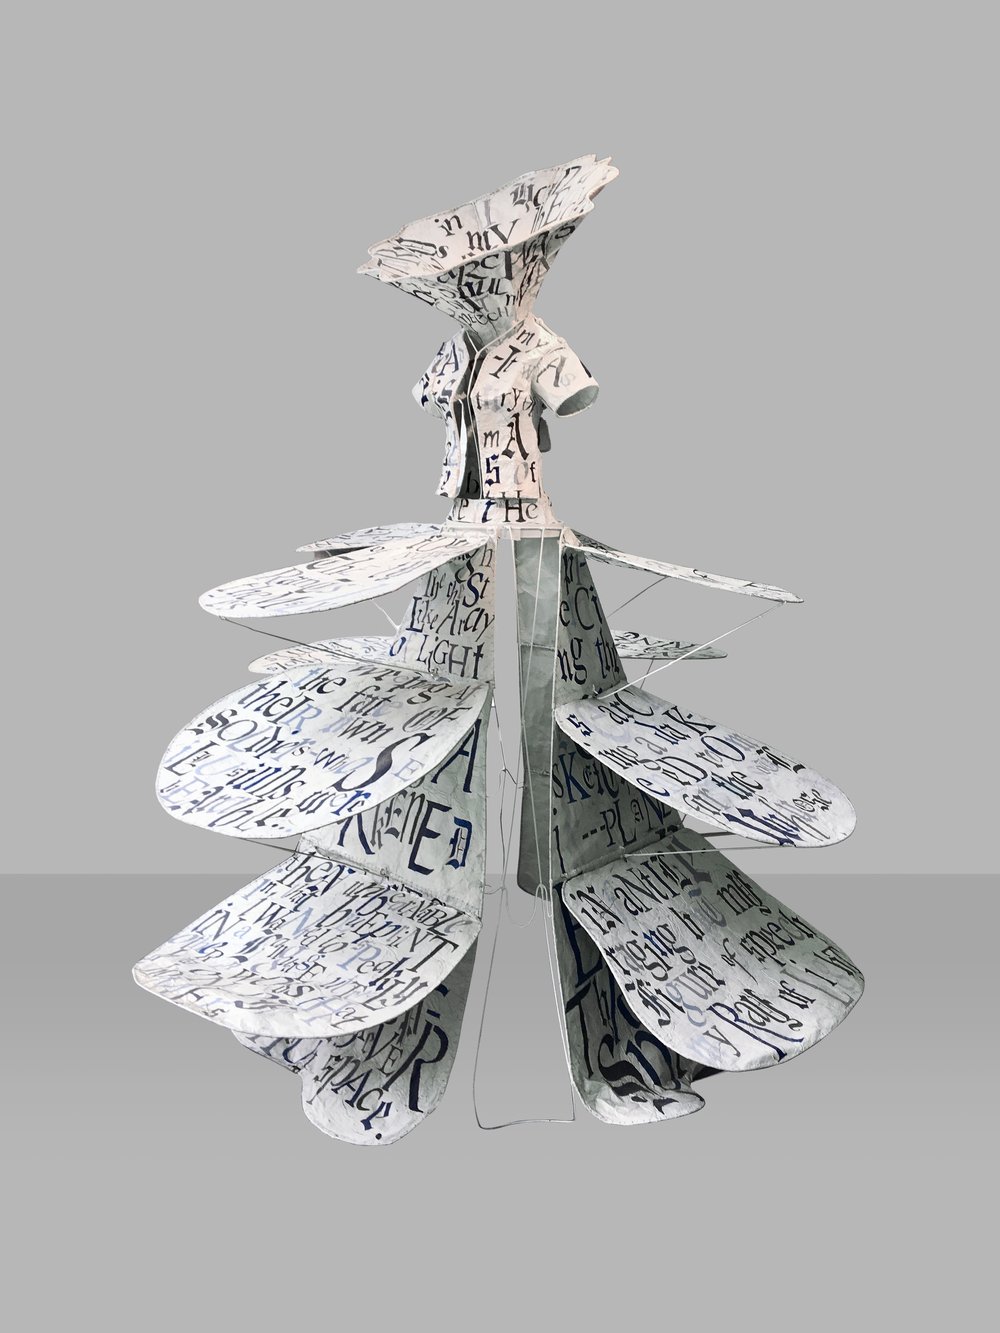  Leslie Dill,&nbsp;Gown of Blueprint, hand-painted metal with oil paint on metal armature, 78 x 58 x 58 in.  